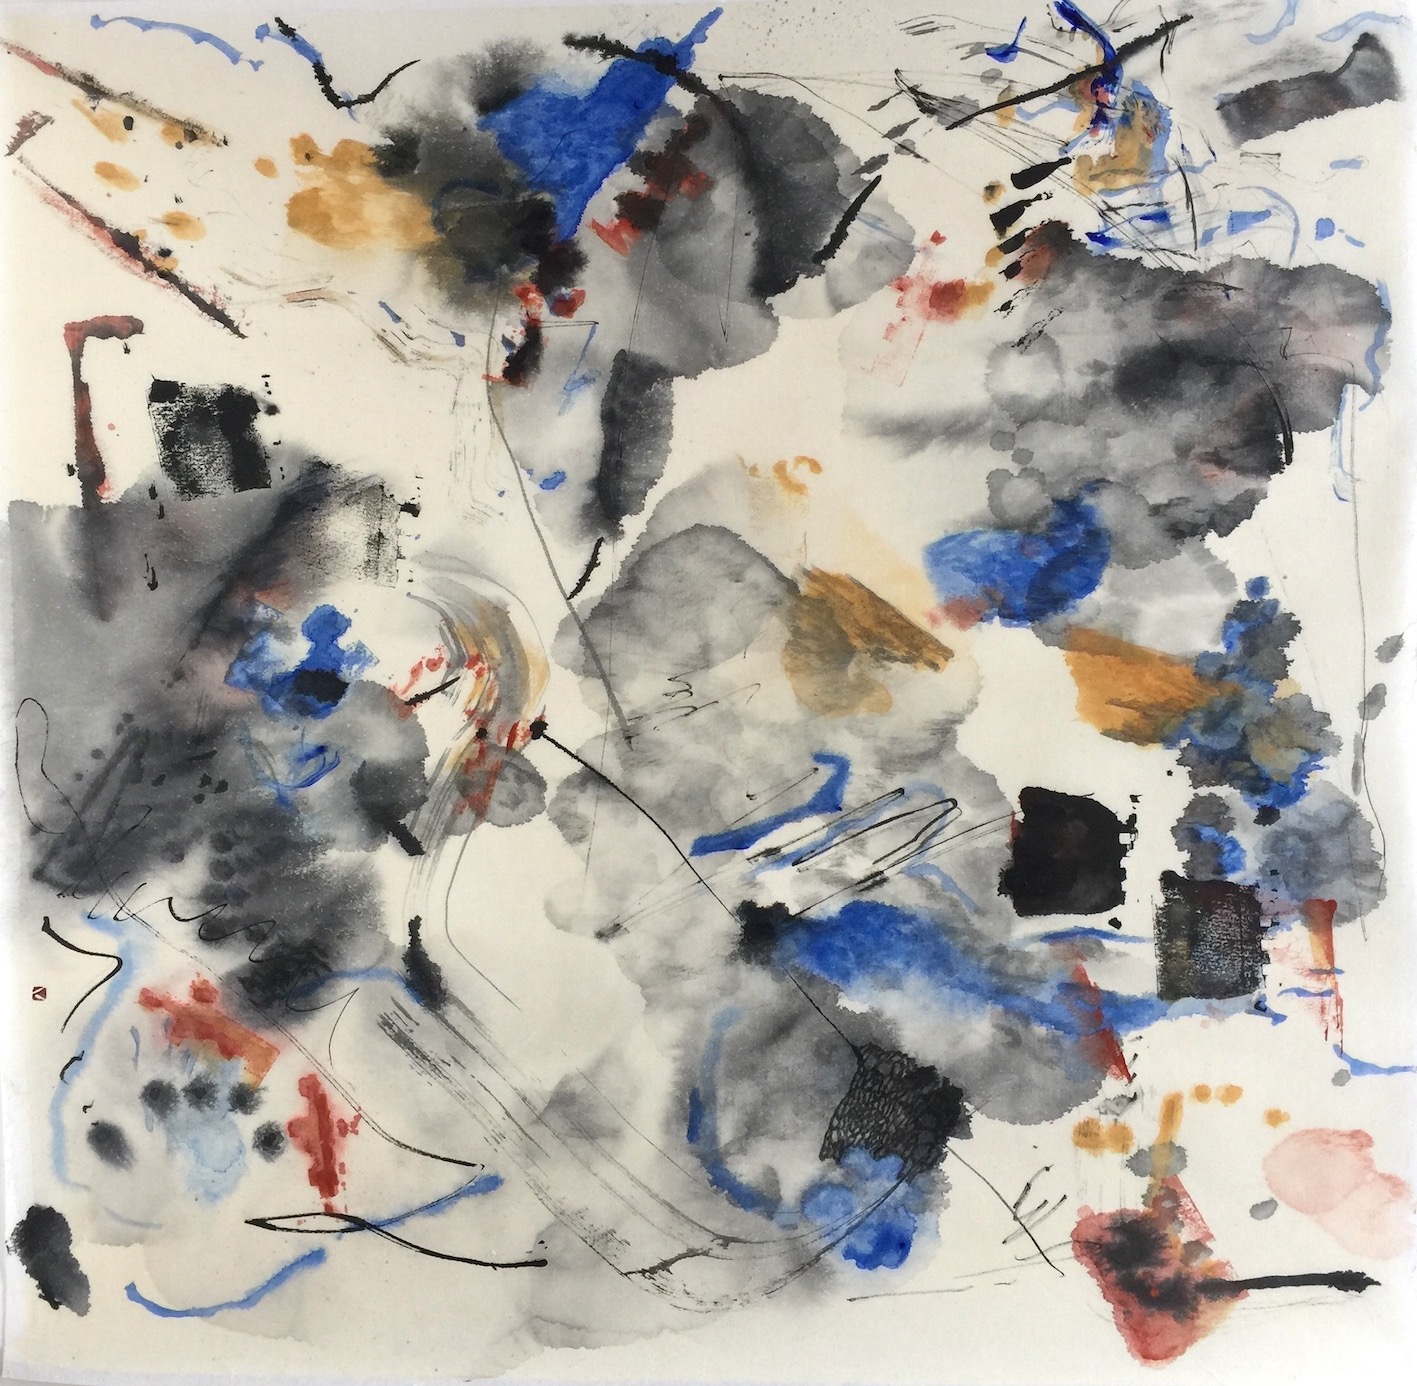 Breaks in the Clouds 2 49 X 48 cms, Sumi ink, acrylic 雲の裂け目2 墨、アクリル　　2020